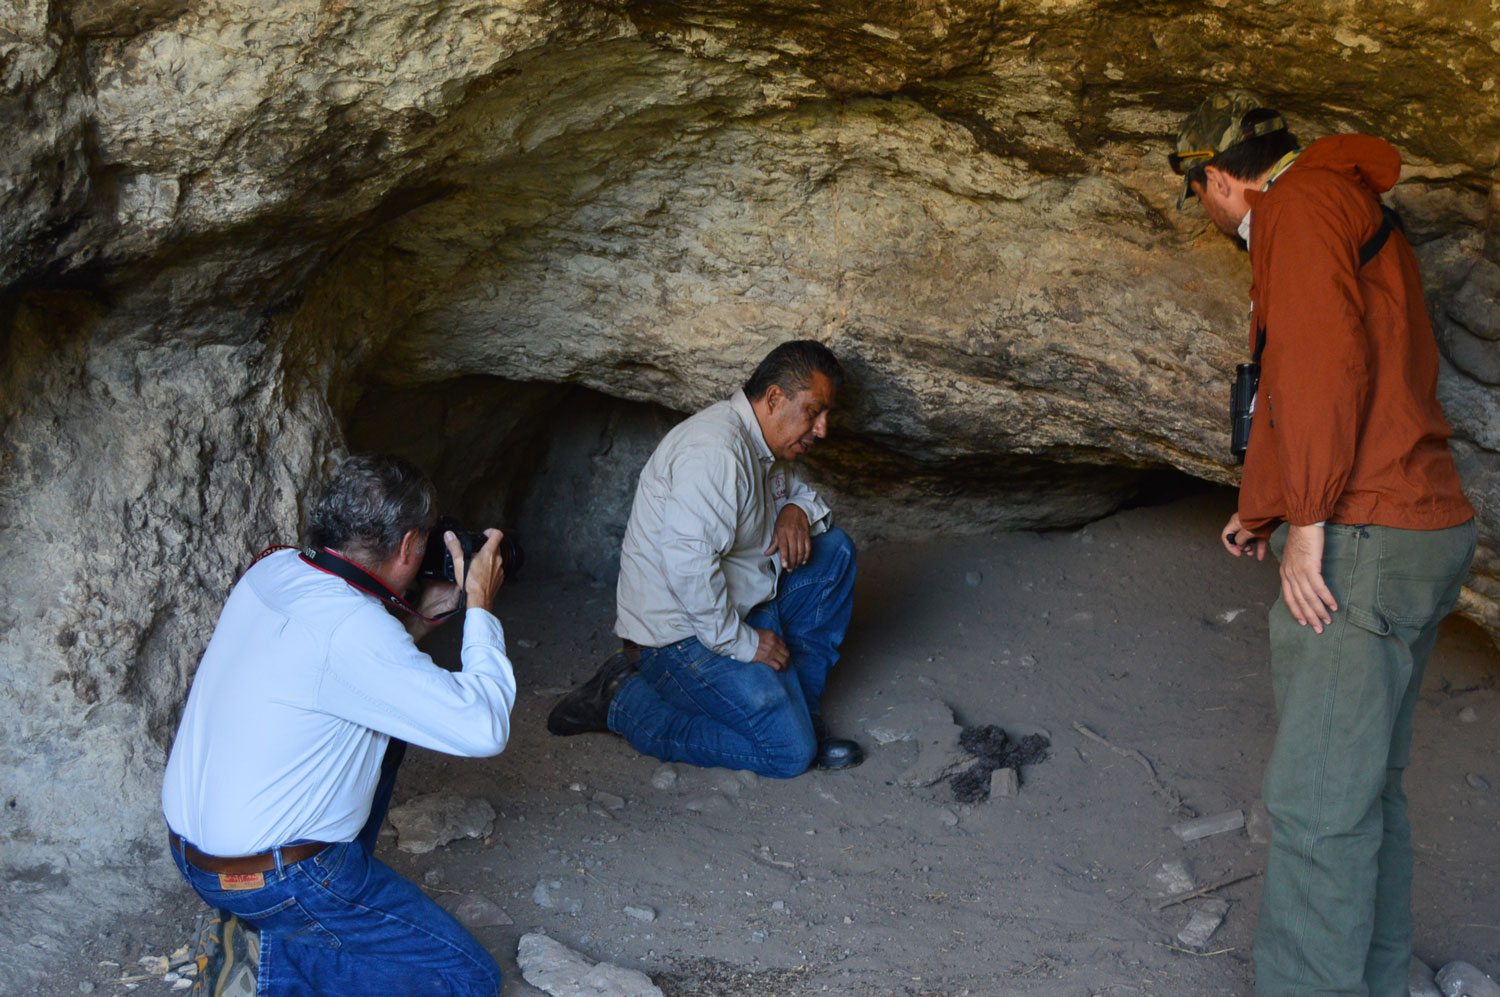 Staff biologist explaining animal sign in small cave